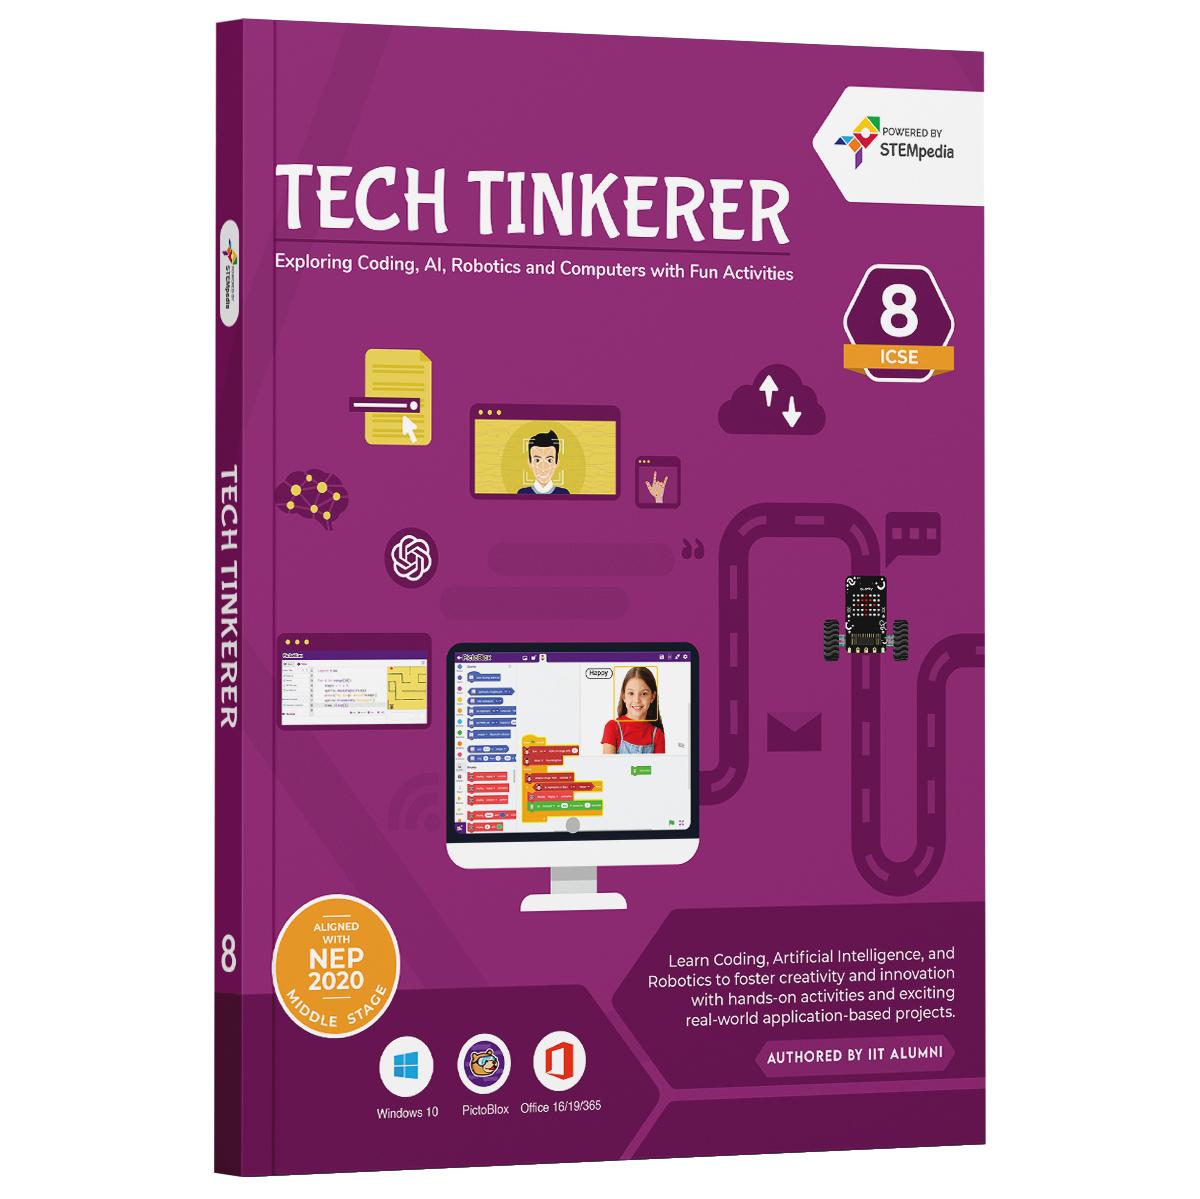 Engage in Coding, AI & Robotics with STEMpedia Tech Tinkerer (ICSE Class 8th)